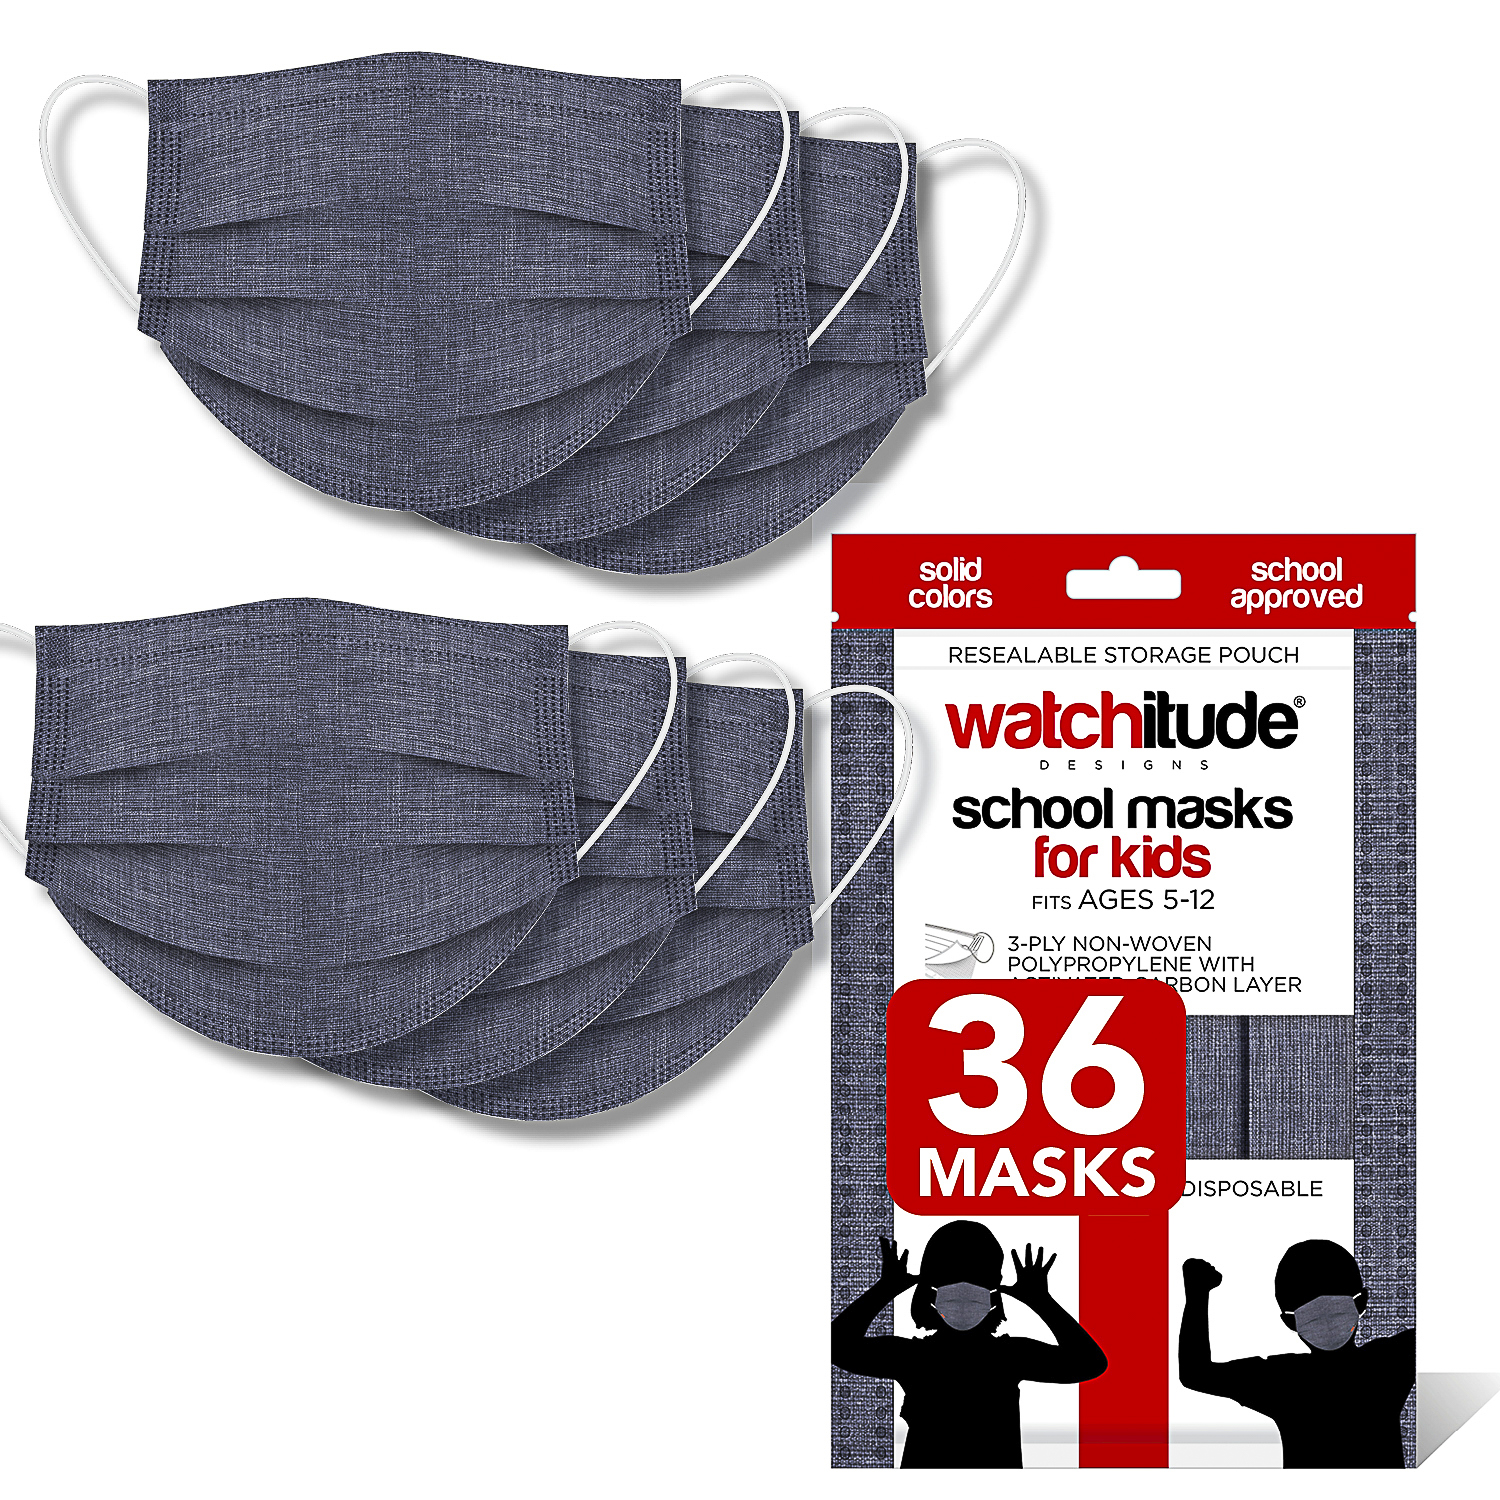 Charcoal Gray - Watchitude Kids School Masks (36-pack) - Solid Color - School Approved image number 0